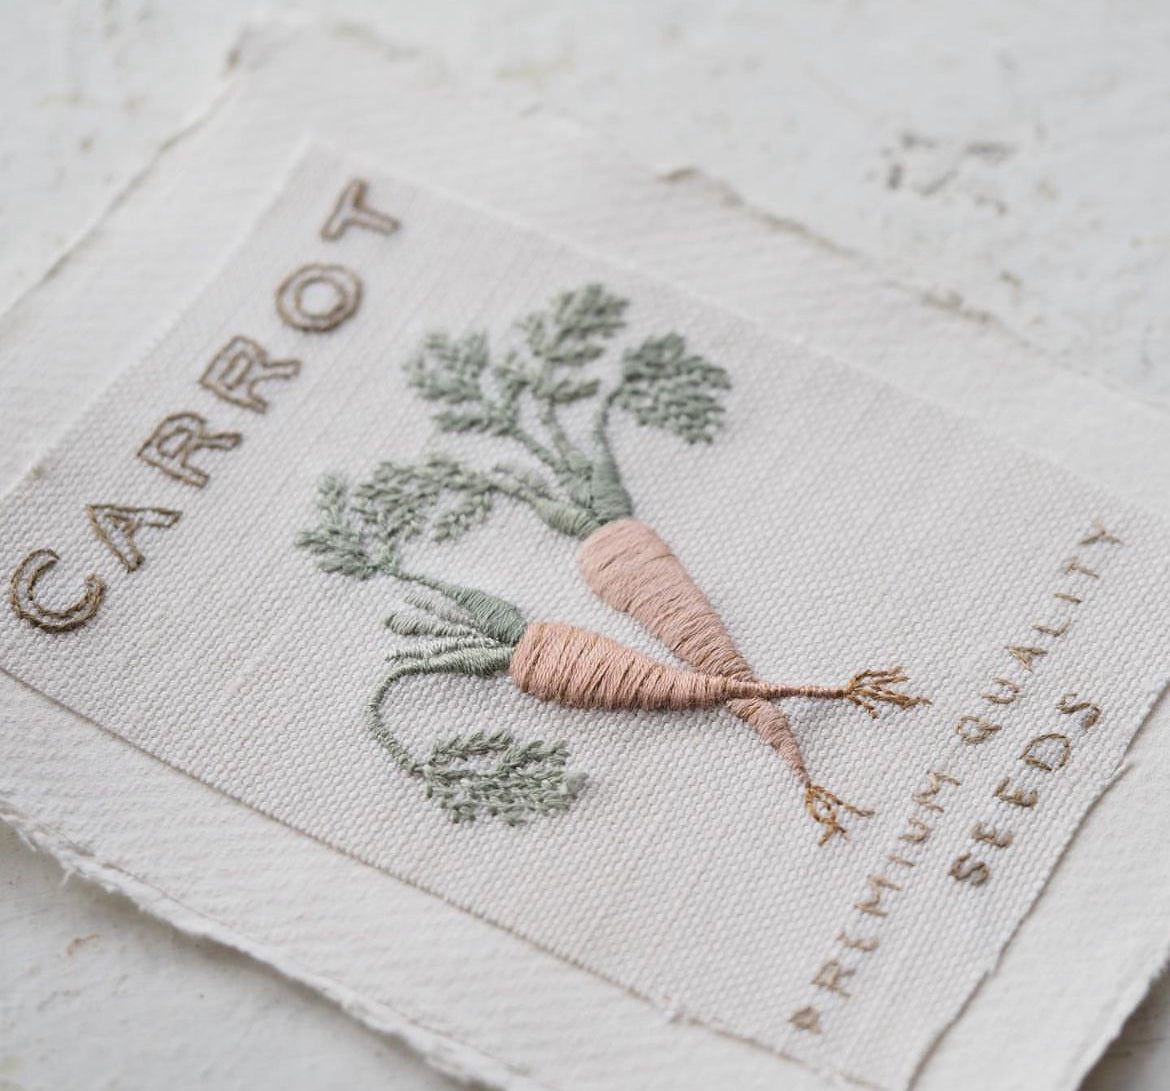 The Stitchery Embroidery Kit: The Potting Shed {Carrot}